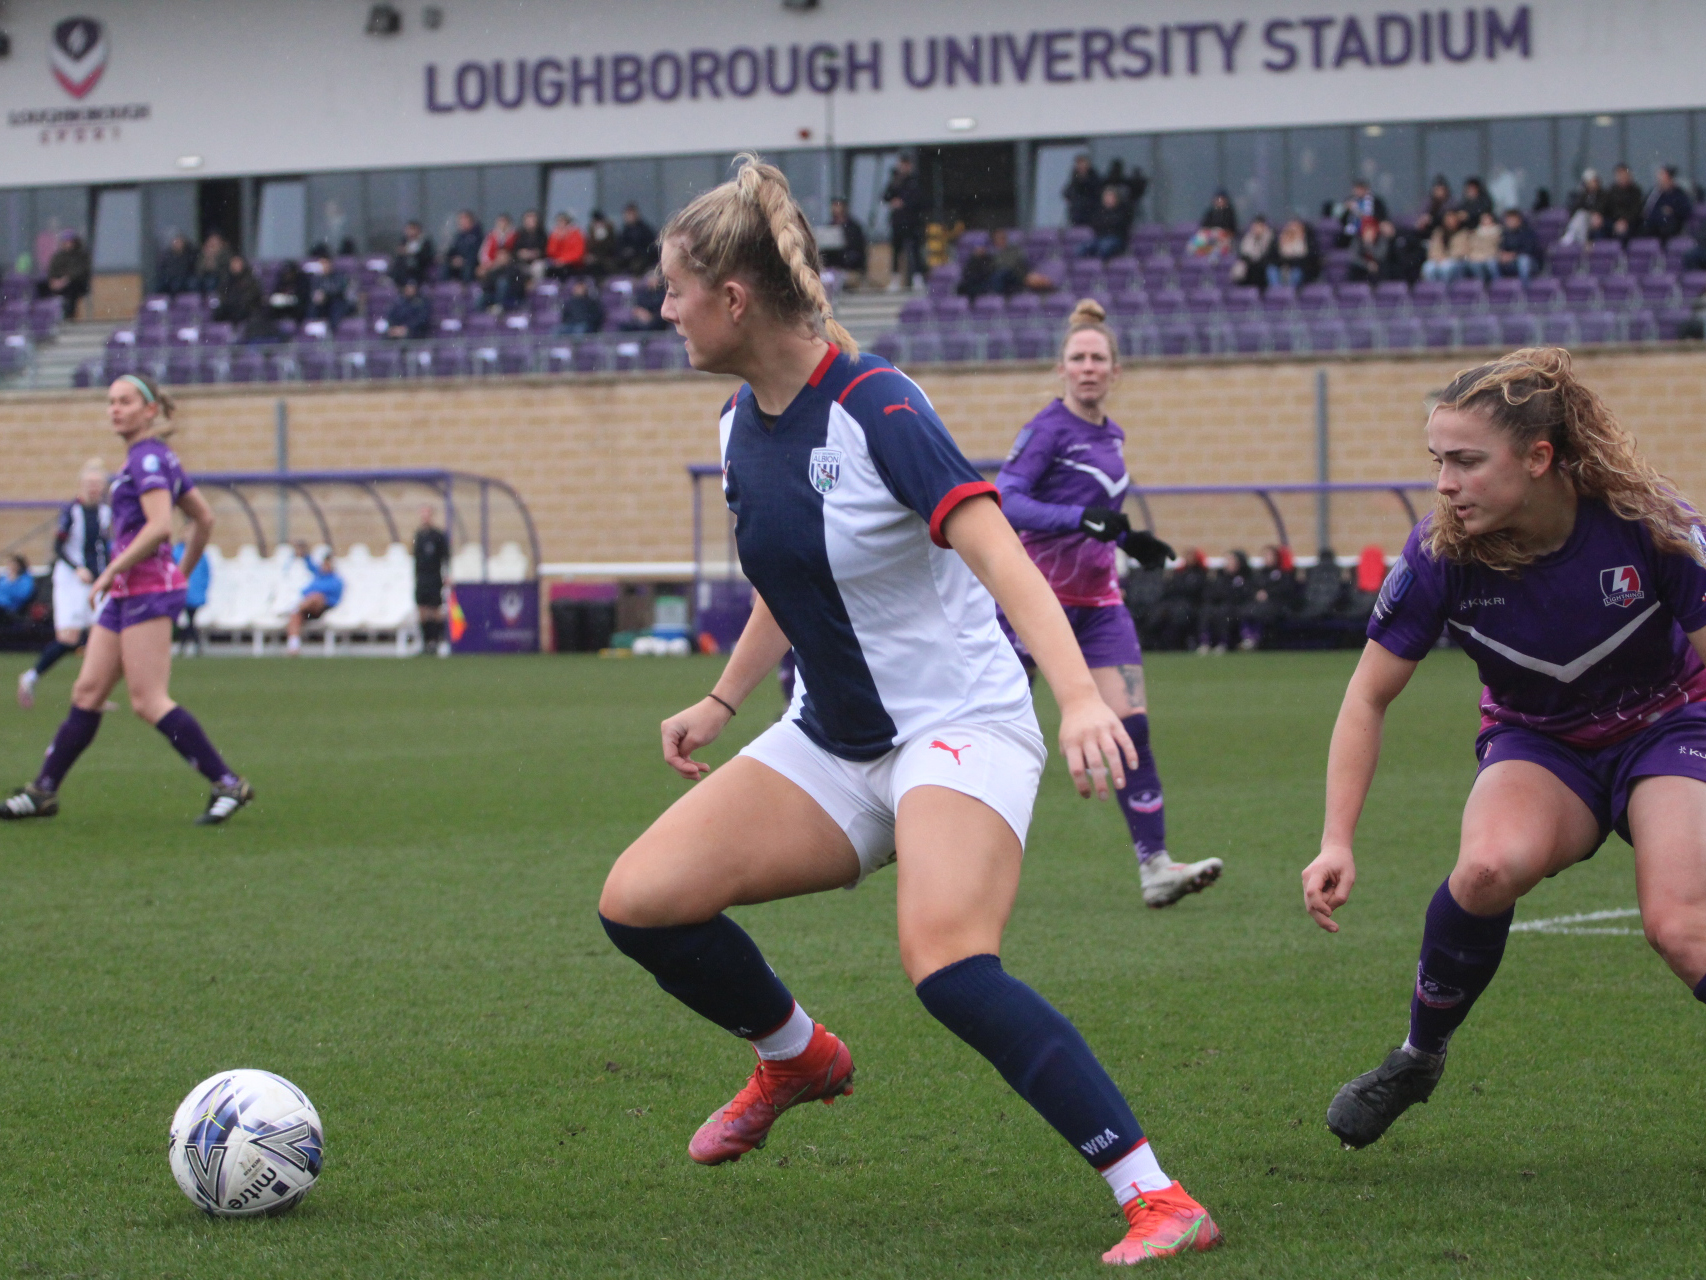 Albion suffered a late defeat to Loughborough Lightning at the Loughborough University Stadium on Sunday afternoon